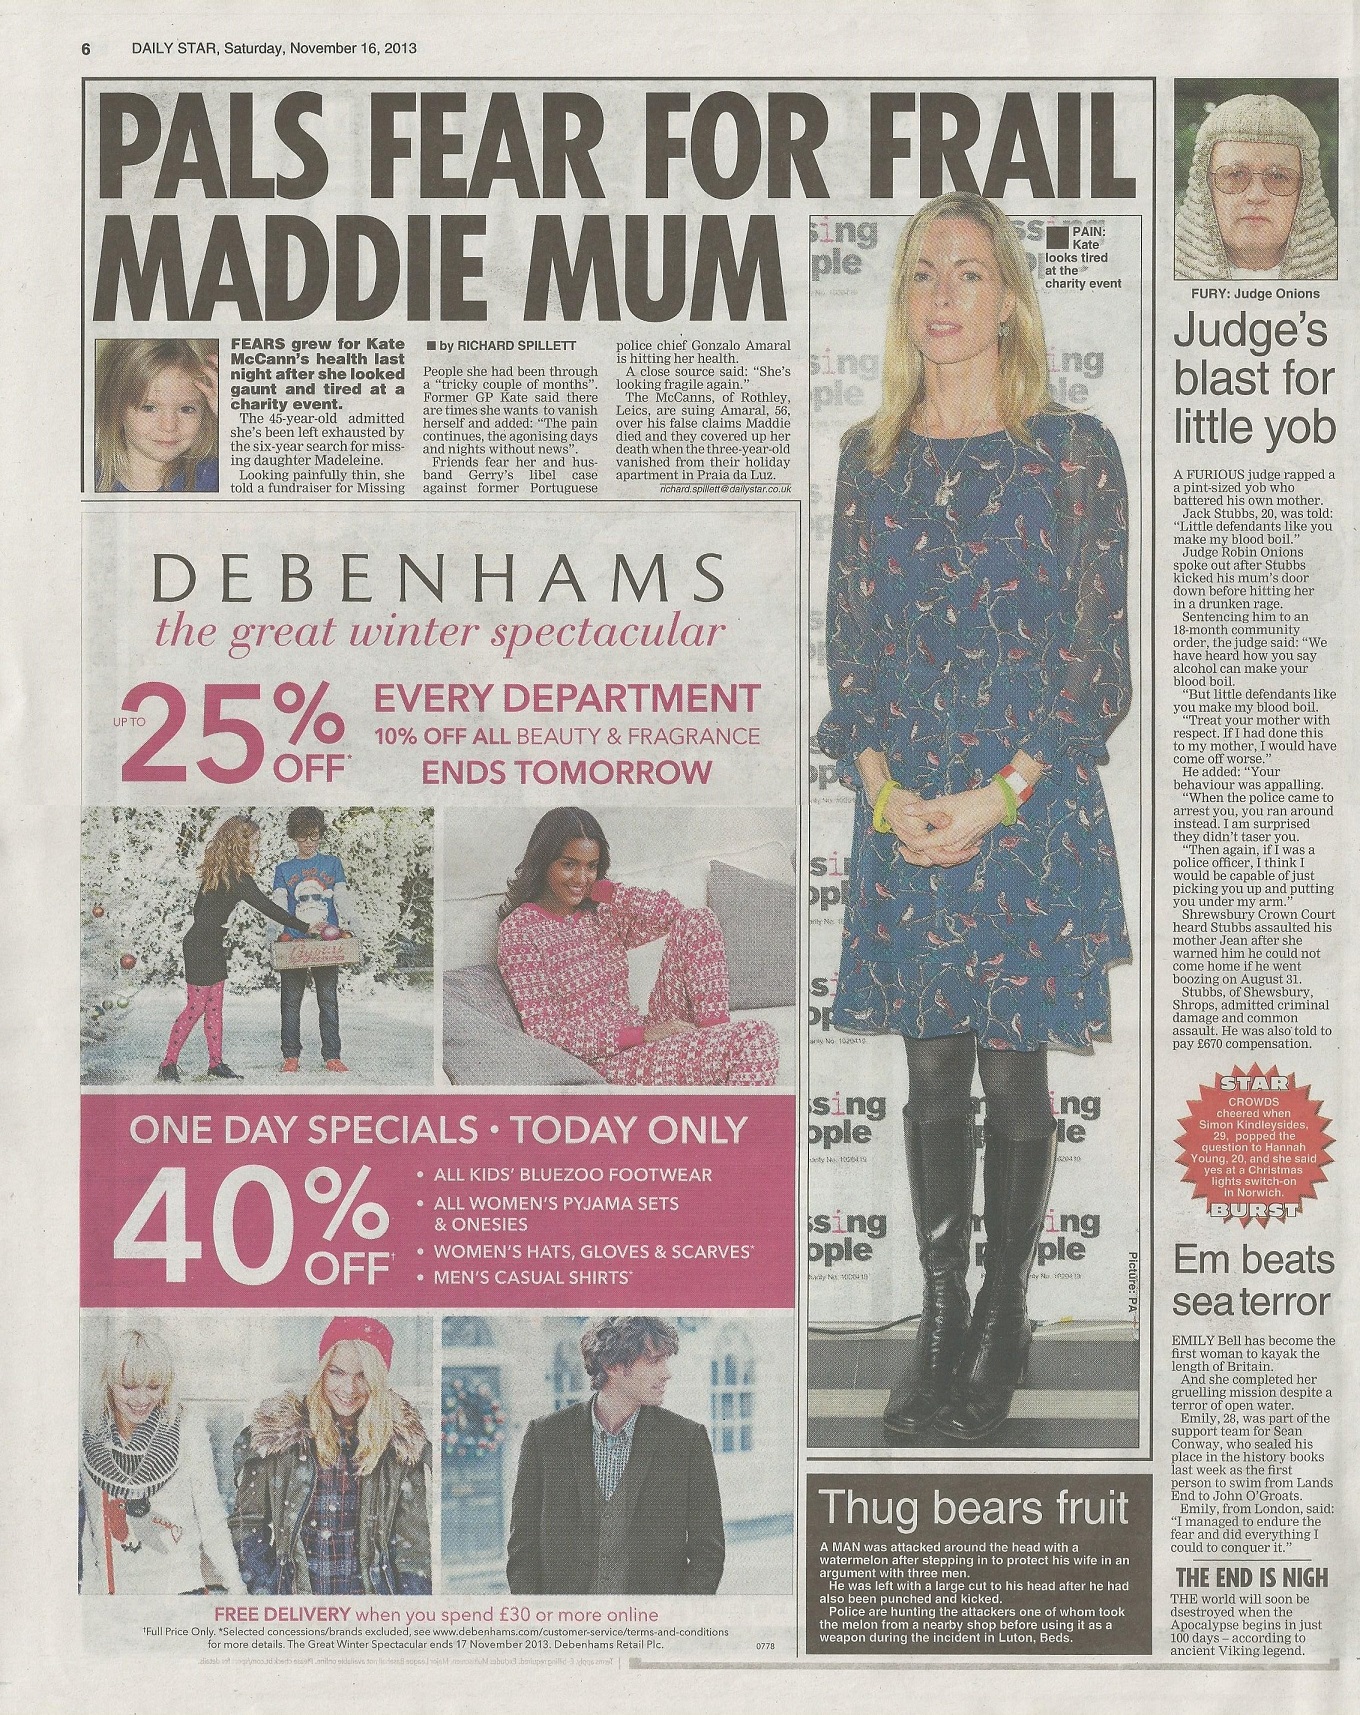 Daily Star, paper edition, page 6: 'PALS FEAR FOR FRAIL MADDIE MUM', 16 November 2013